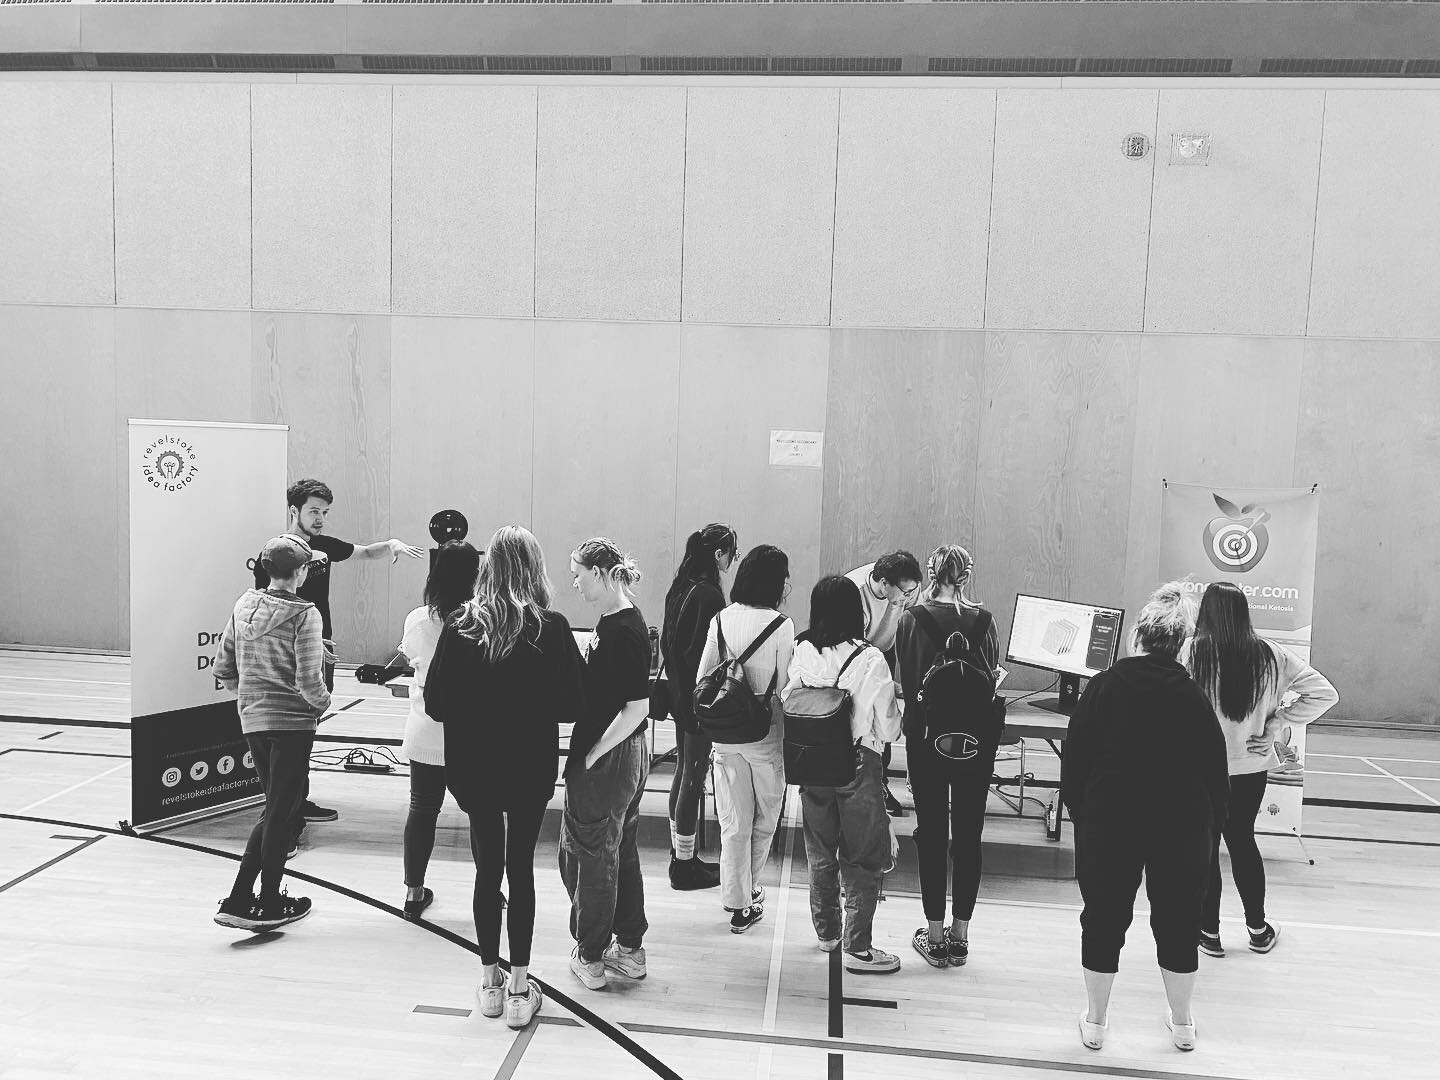 Come down and see us at the Revy Science &amp; Tech Summit at Revelstoke Secondary today. General public welcome between 12:30pm and 2:00pm 🤖 #SD19 #cityofrevelstoke #screensmart #revyscience&amp;techsummit #revelstokesecondary